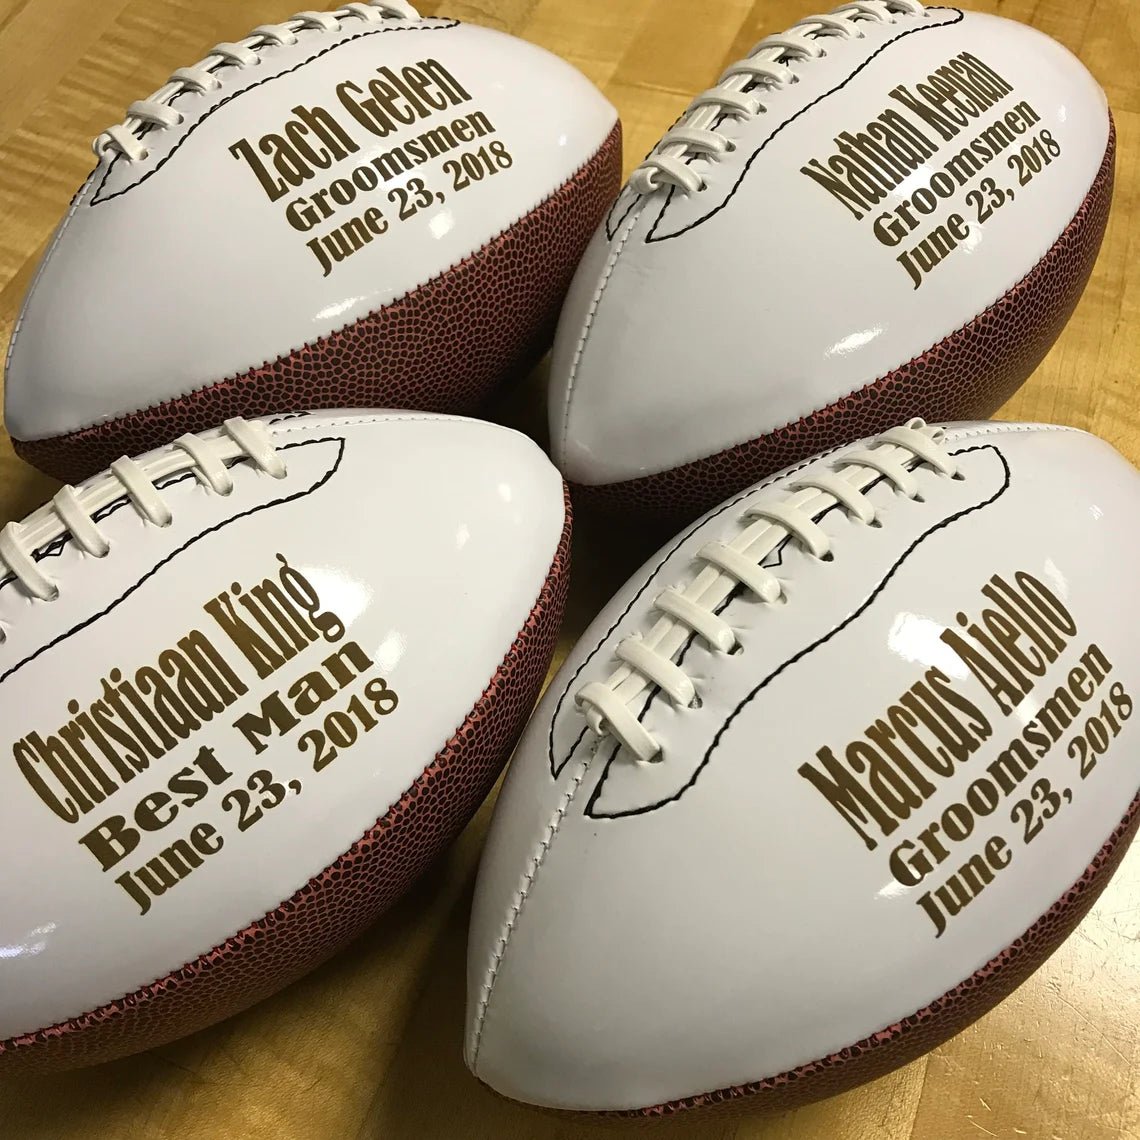 Familywatchs Gift ，Valentines Gift, Groomsman Gift, Ring Bearer Gift, Personalized Football, Best Man Gift, Gifts for Men, Personalized Gift, Sports Gift, - Family Watchs